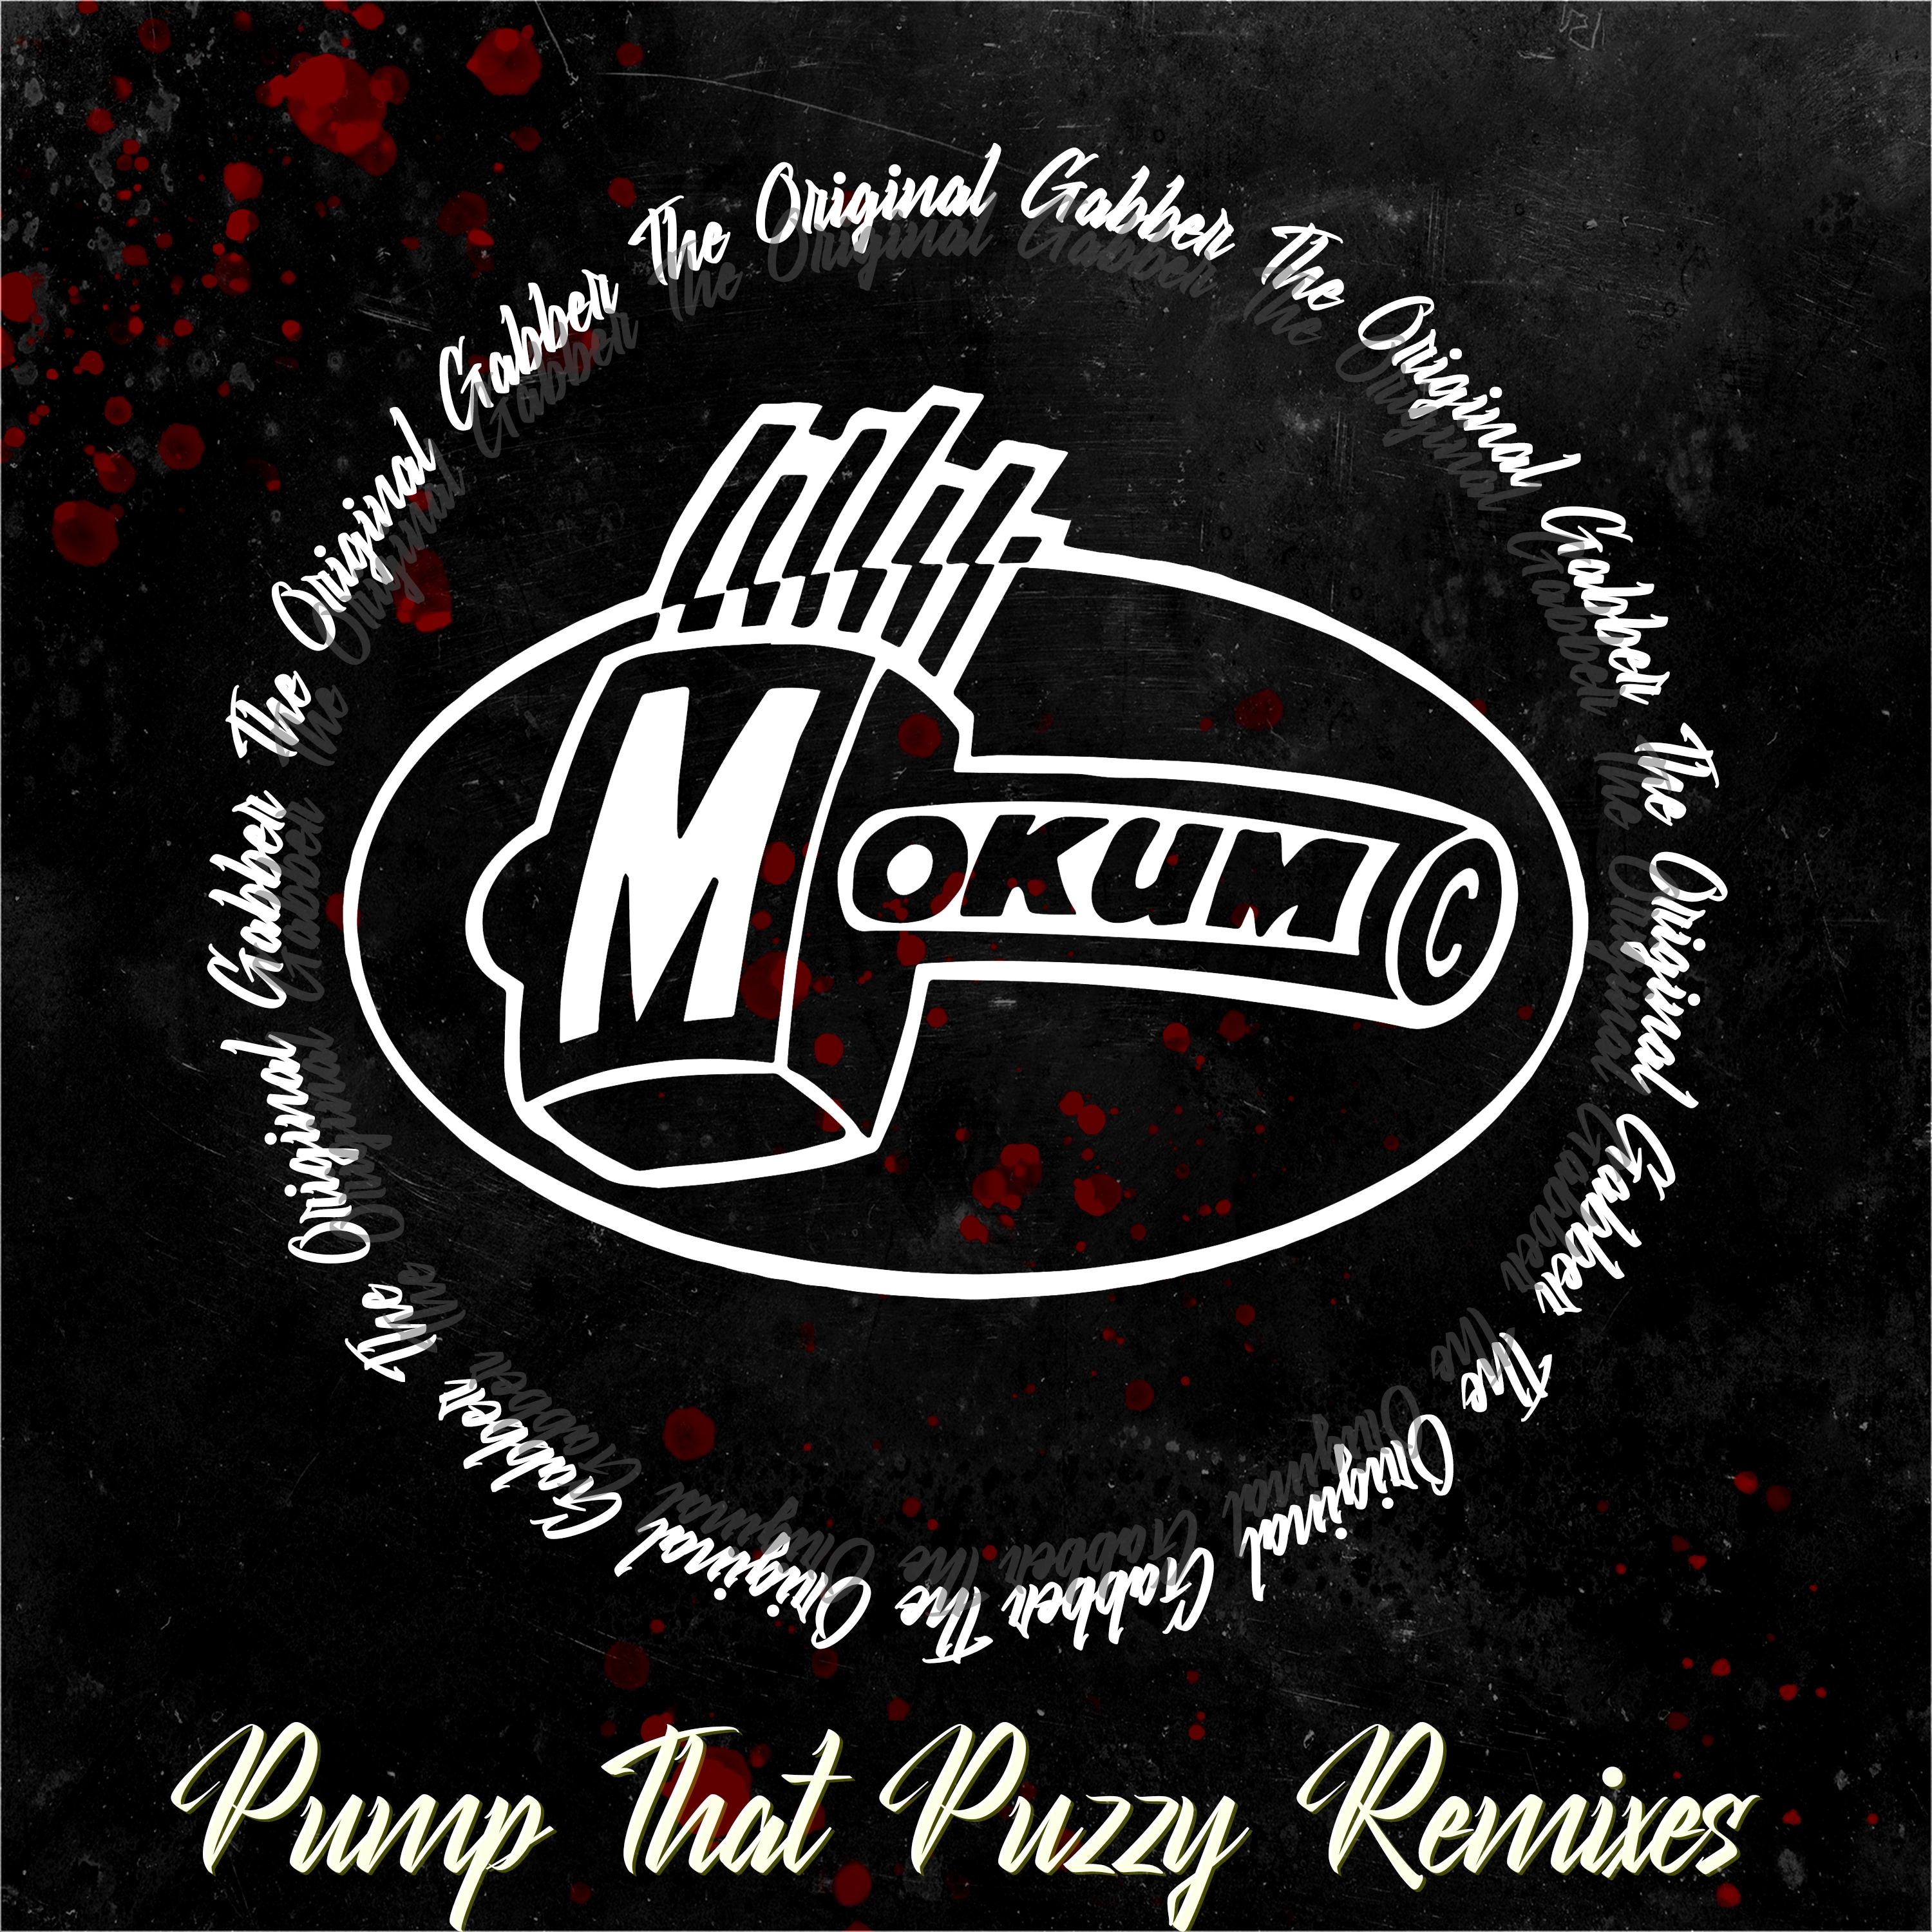 The Original Gabber - Pump That Puzzy (Wicked XXX Shake That Titties Mix) -  MP3 and WAV downloads at Hardtunes